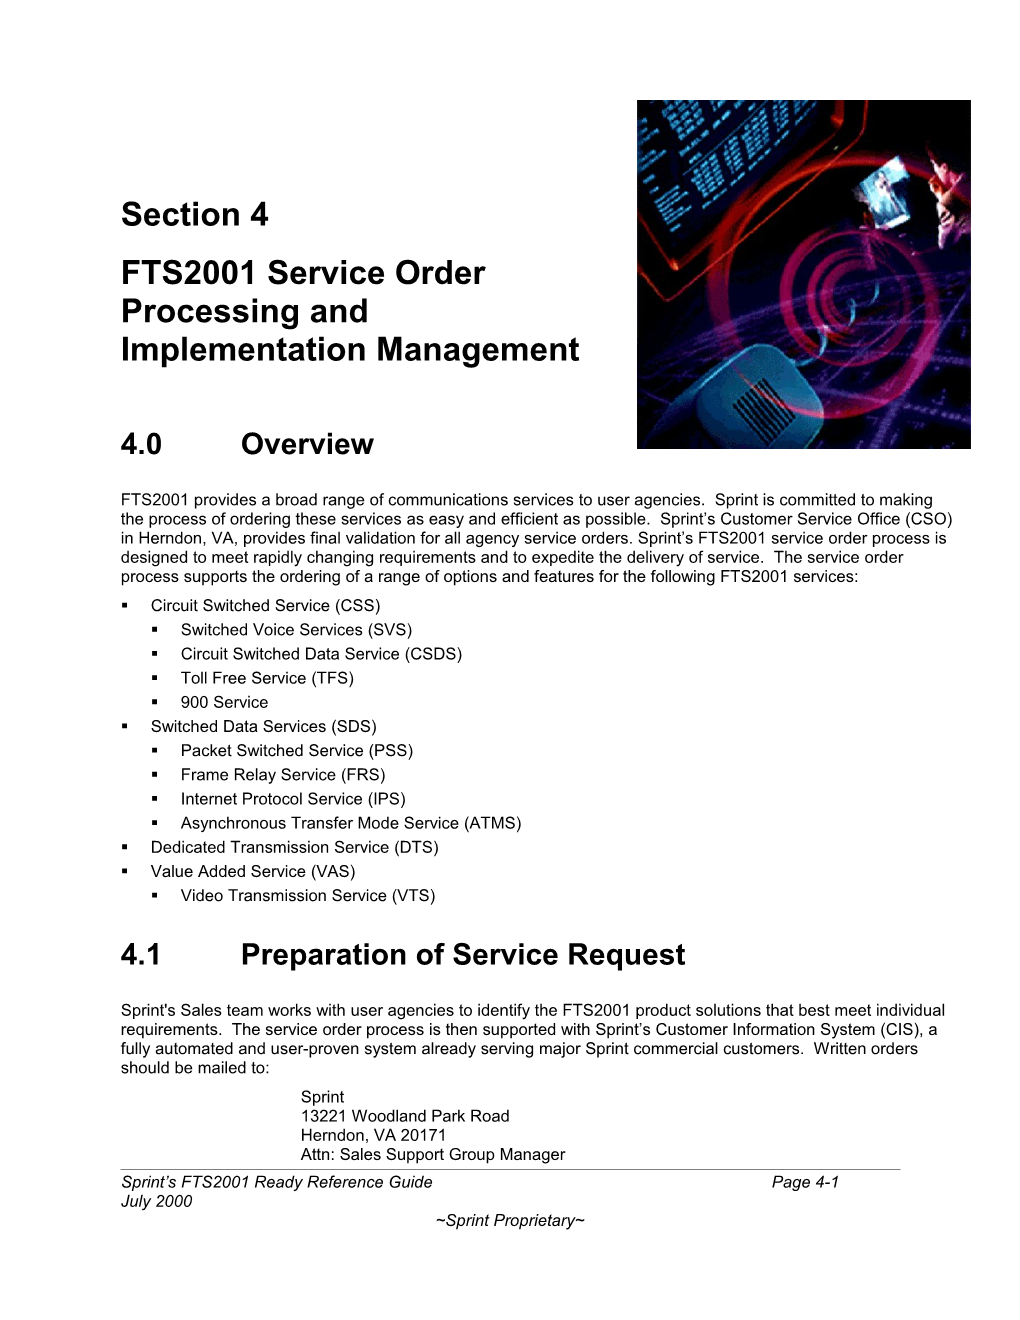 FTS2001 Service Order Processing And